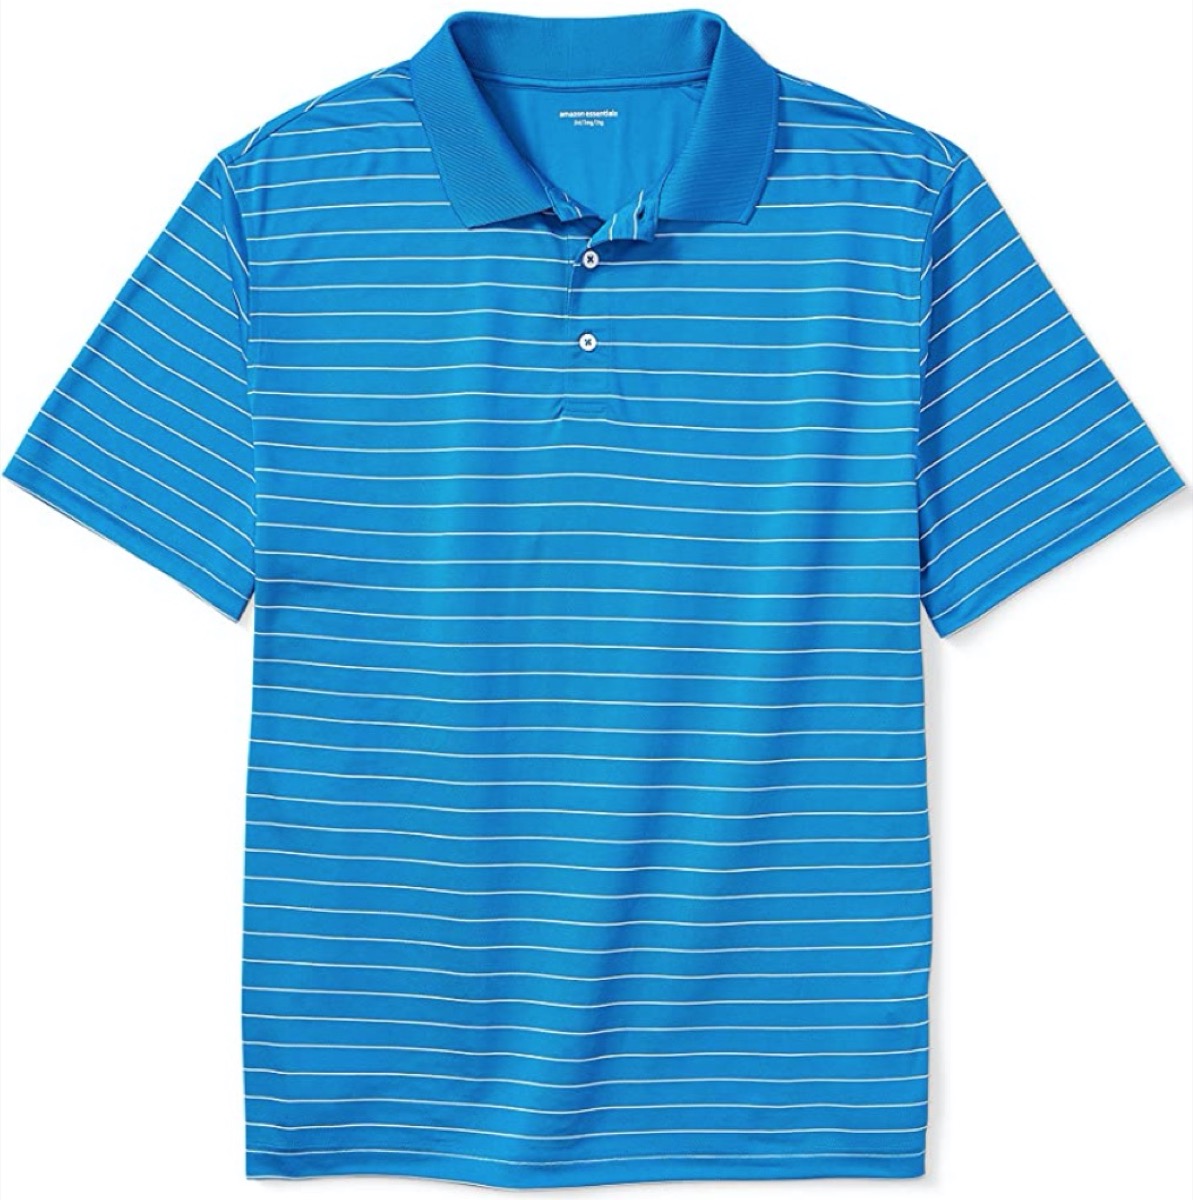 blue and white striped polo shirt